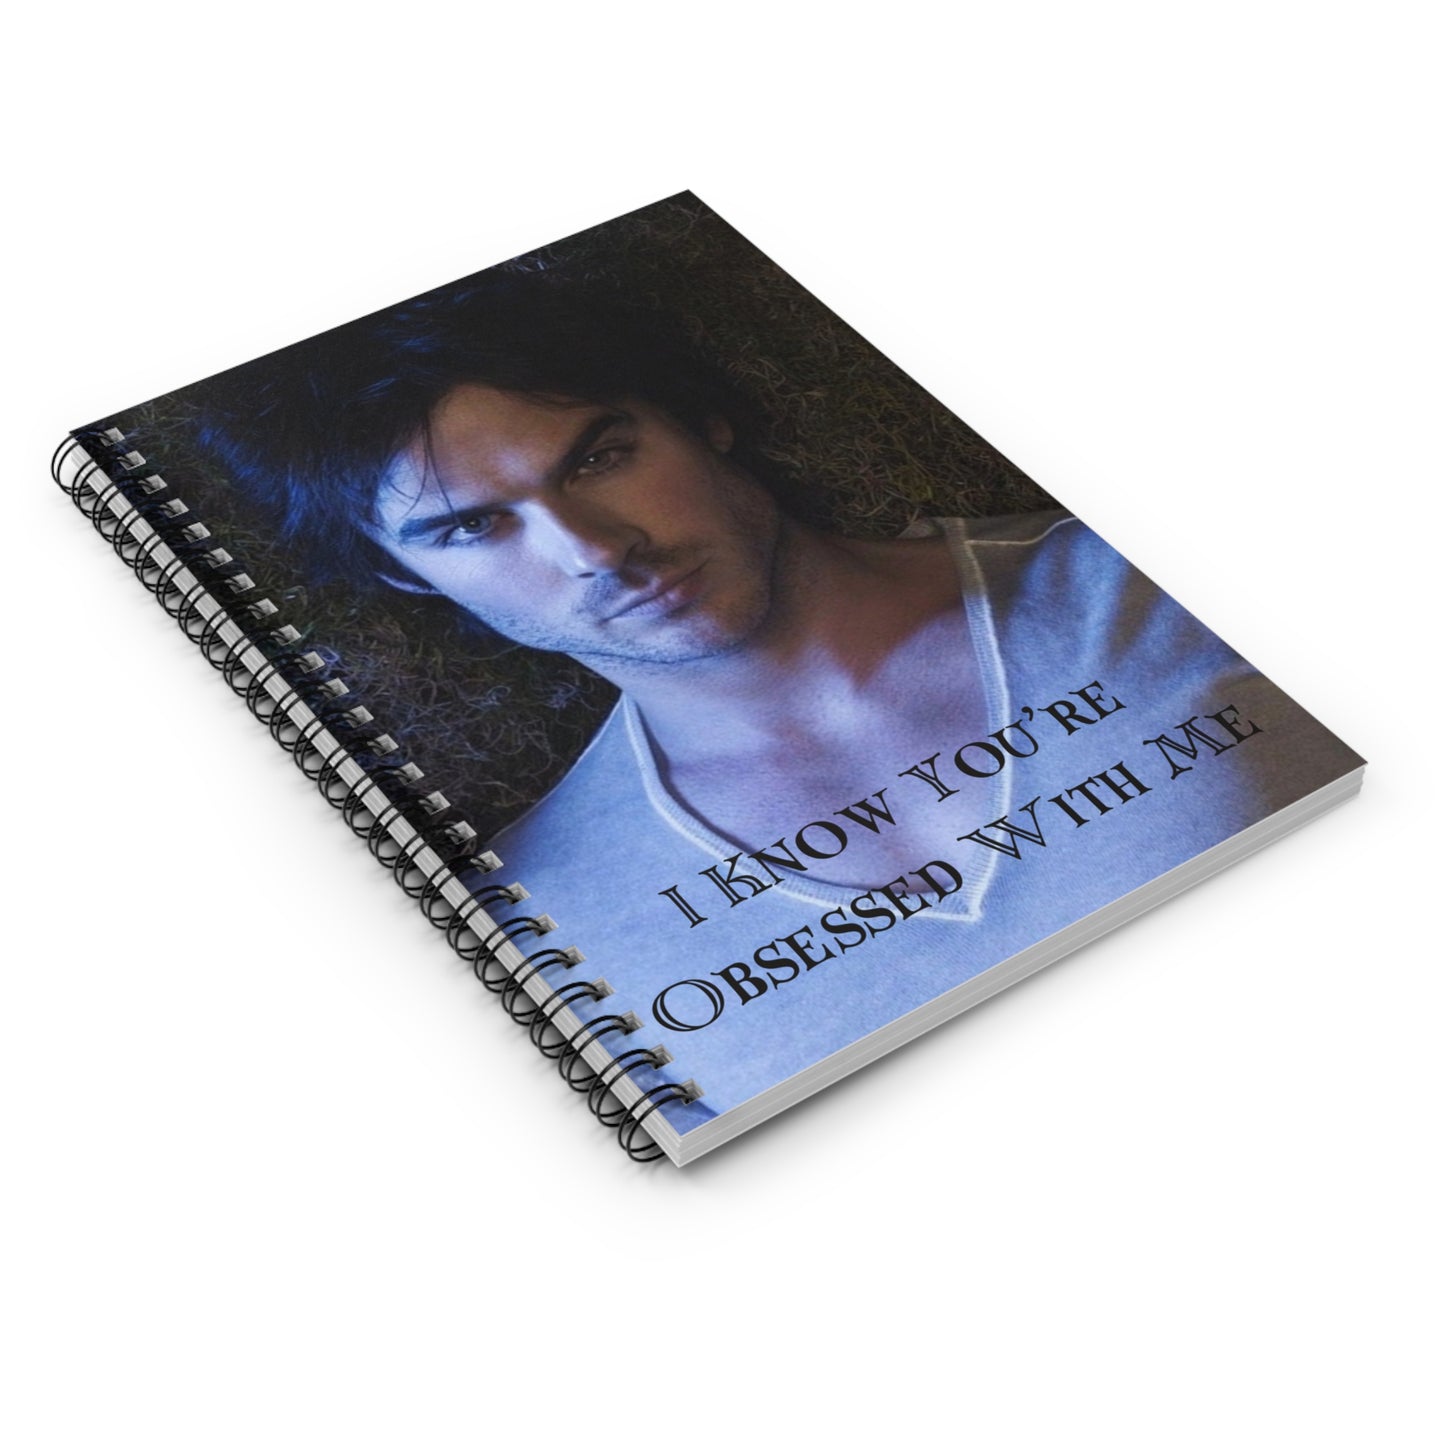 Damon Salvatore Spiral Notebook - Ruled Line I know you're obsessed with me Vampire Diaries